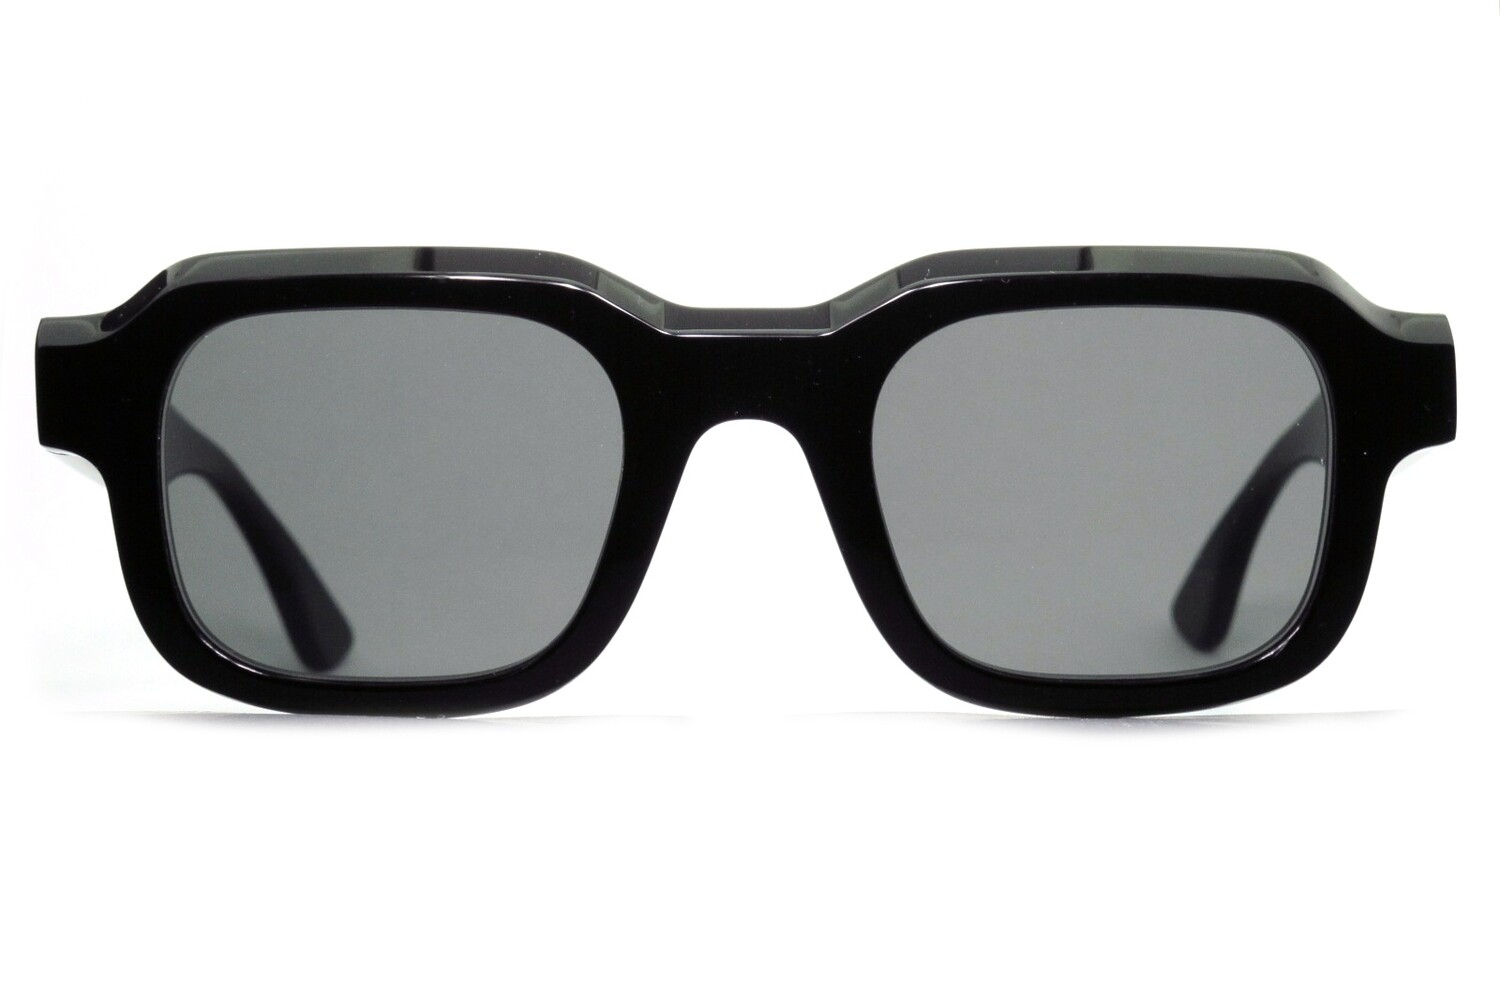 Vendetty by Thierry Lasry